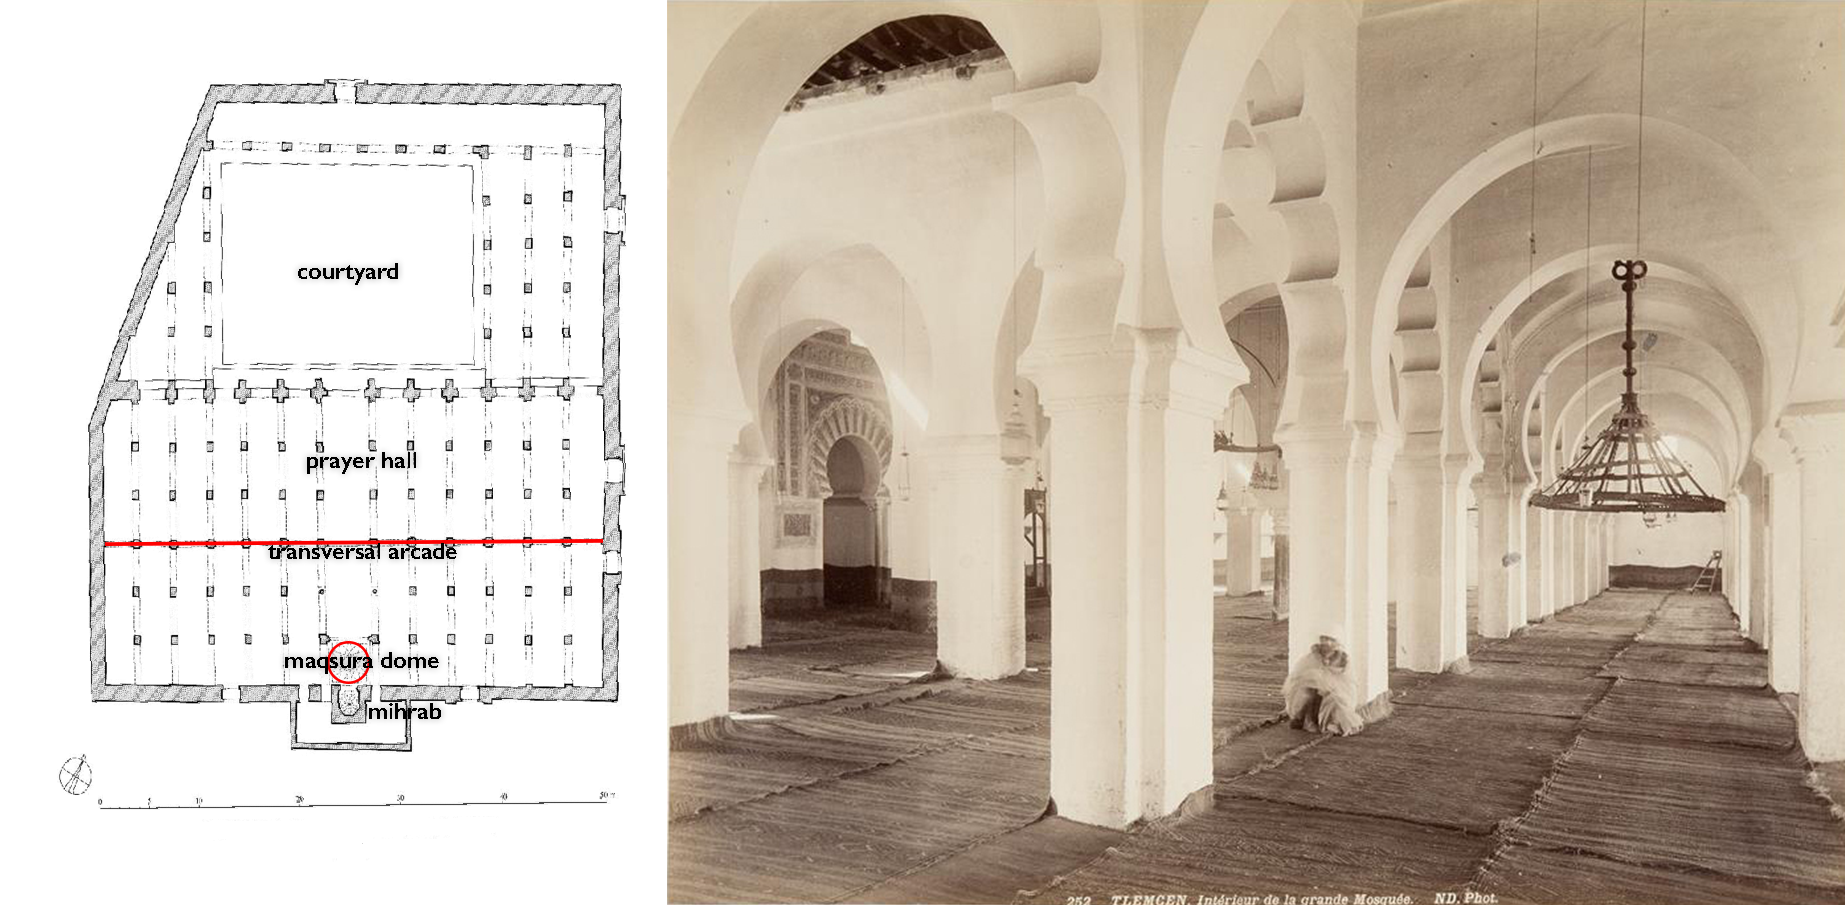 Left: Plan of Tlemcen mosque in 1136 (after Almagro, CC BY-NC 4.0); right: interior, Great Mosque of Tlemcen, showing horseshoe arcades (the view to the right) and a transversal arcade with polylobed arches (visible in the center of the photograph), 1136 (Hallwylska museet, Stockholm)